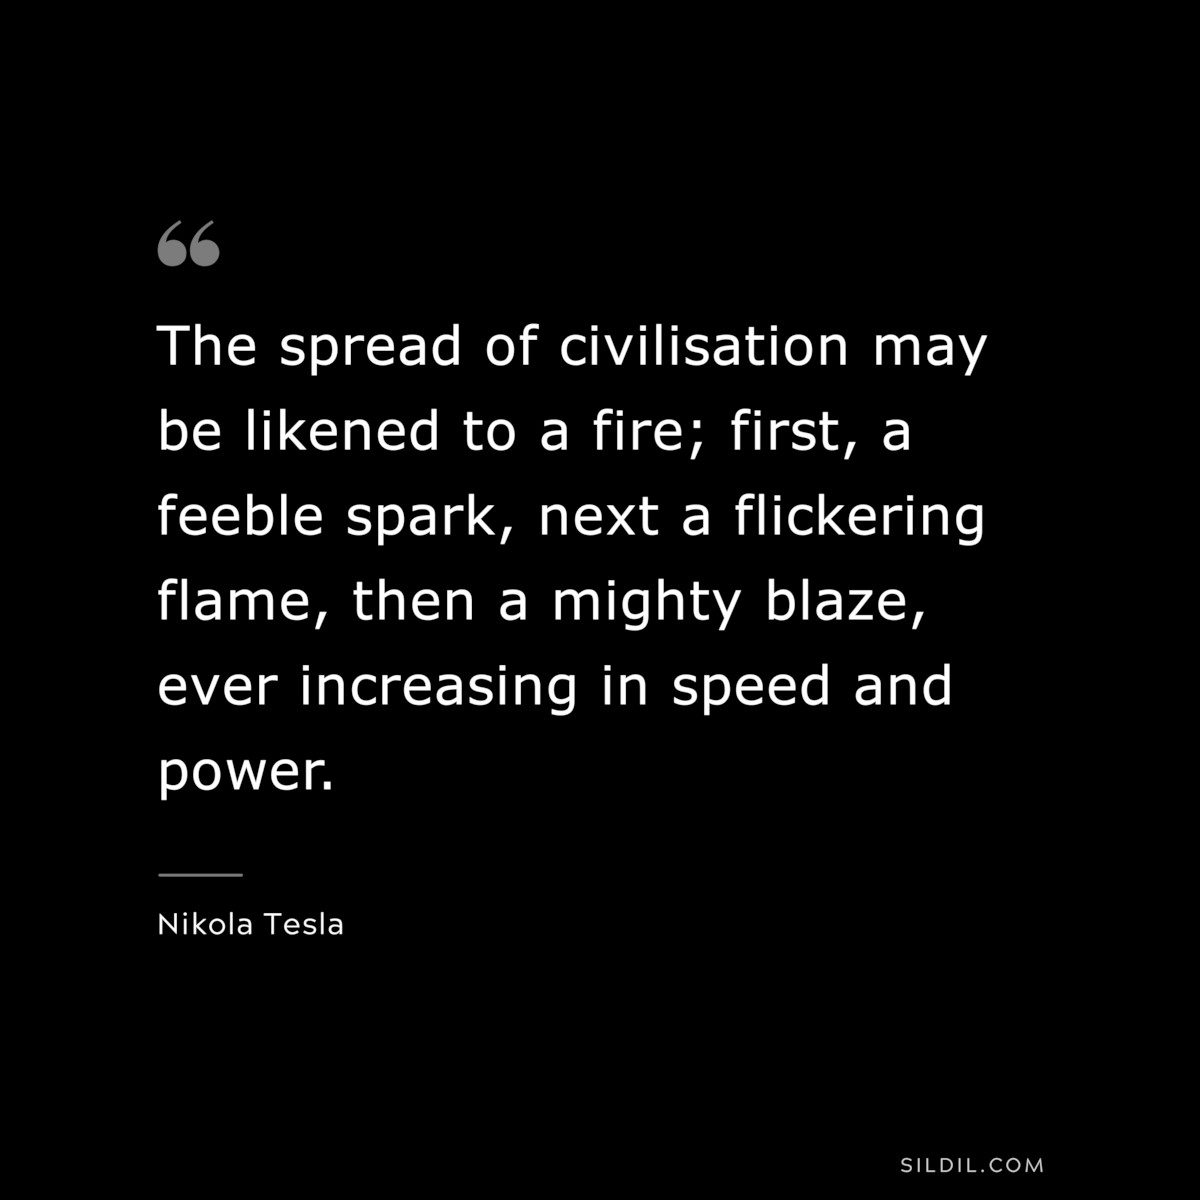 The spread of civilisation may be likened to a fire; first, a feeble spark, next a flickering flame, then a mighty blaze, ever increasing in speed and power. ― Nikola Tesla